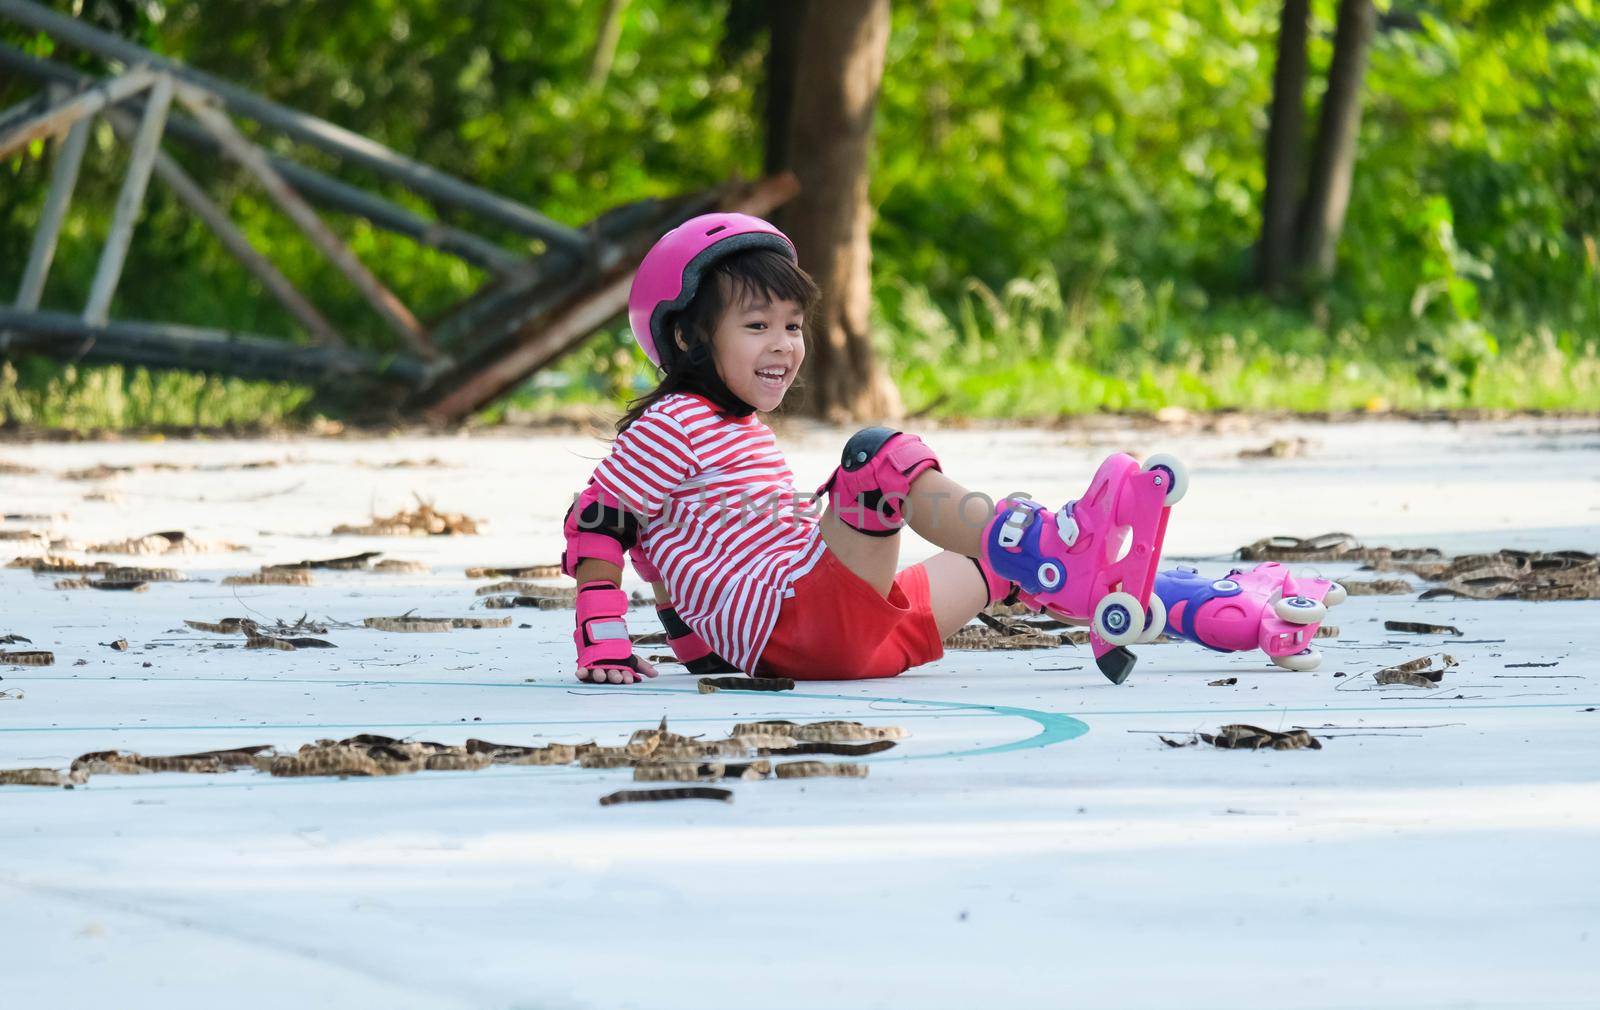 Cute Asian little girl in protective pads and safety helmet practicing roller skating in the park. Exciting outdoor activities for kids. A preschooler wearing roller skates falls down. by TEERASAK